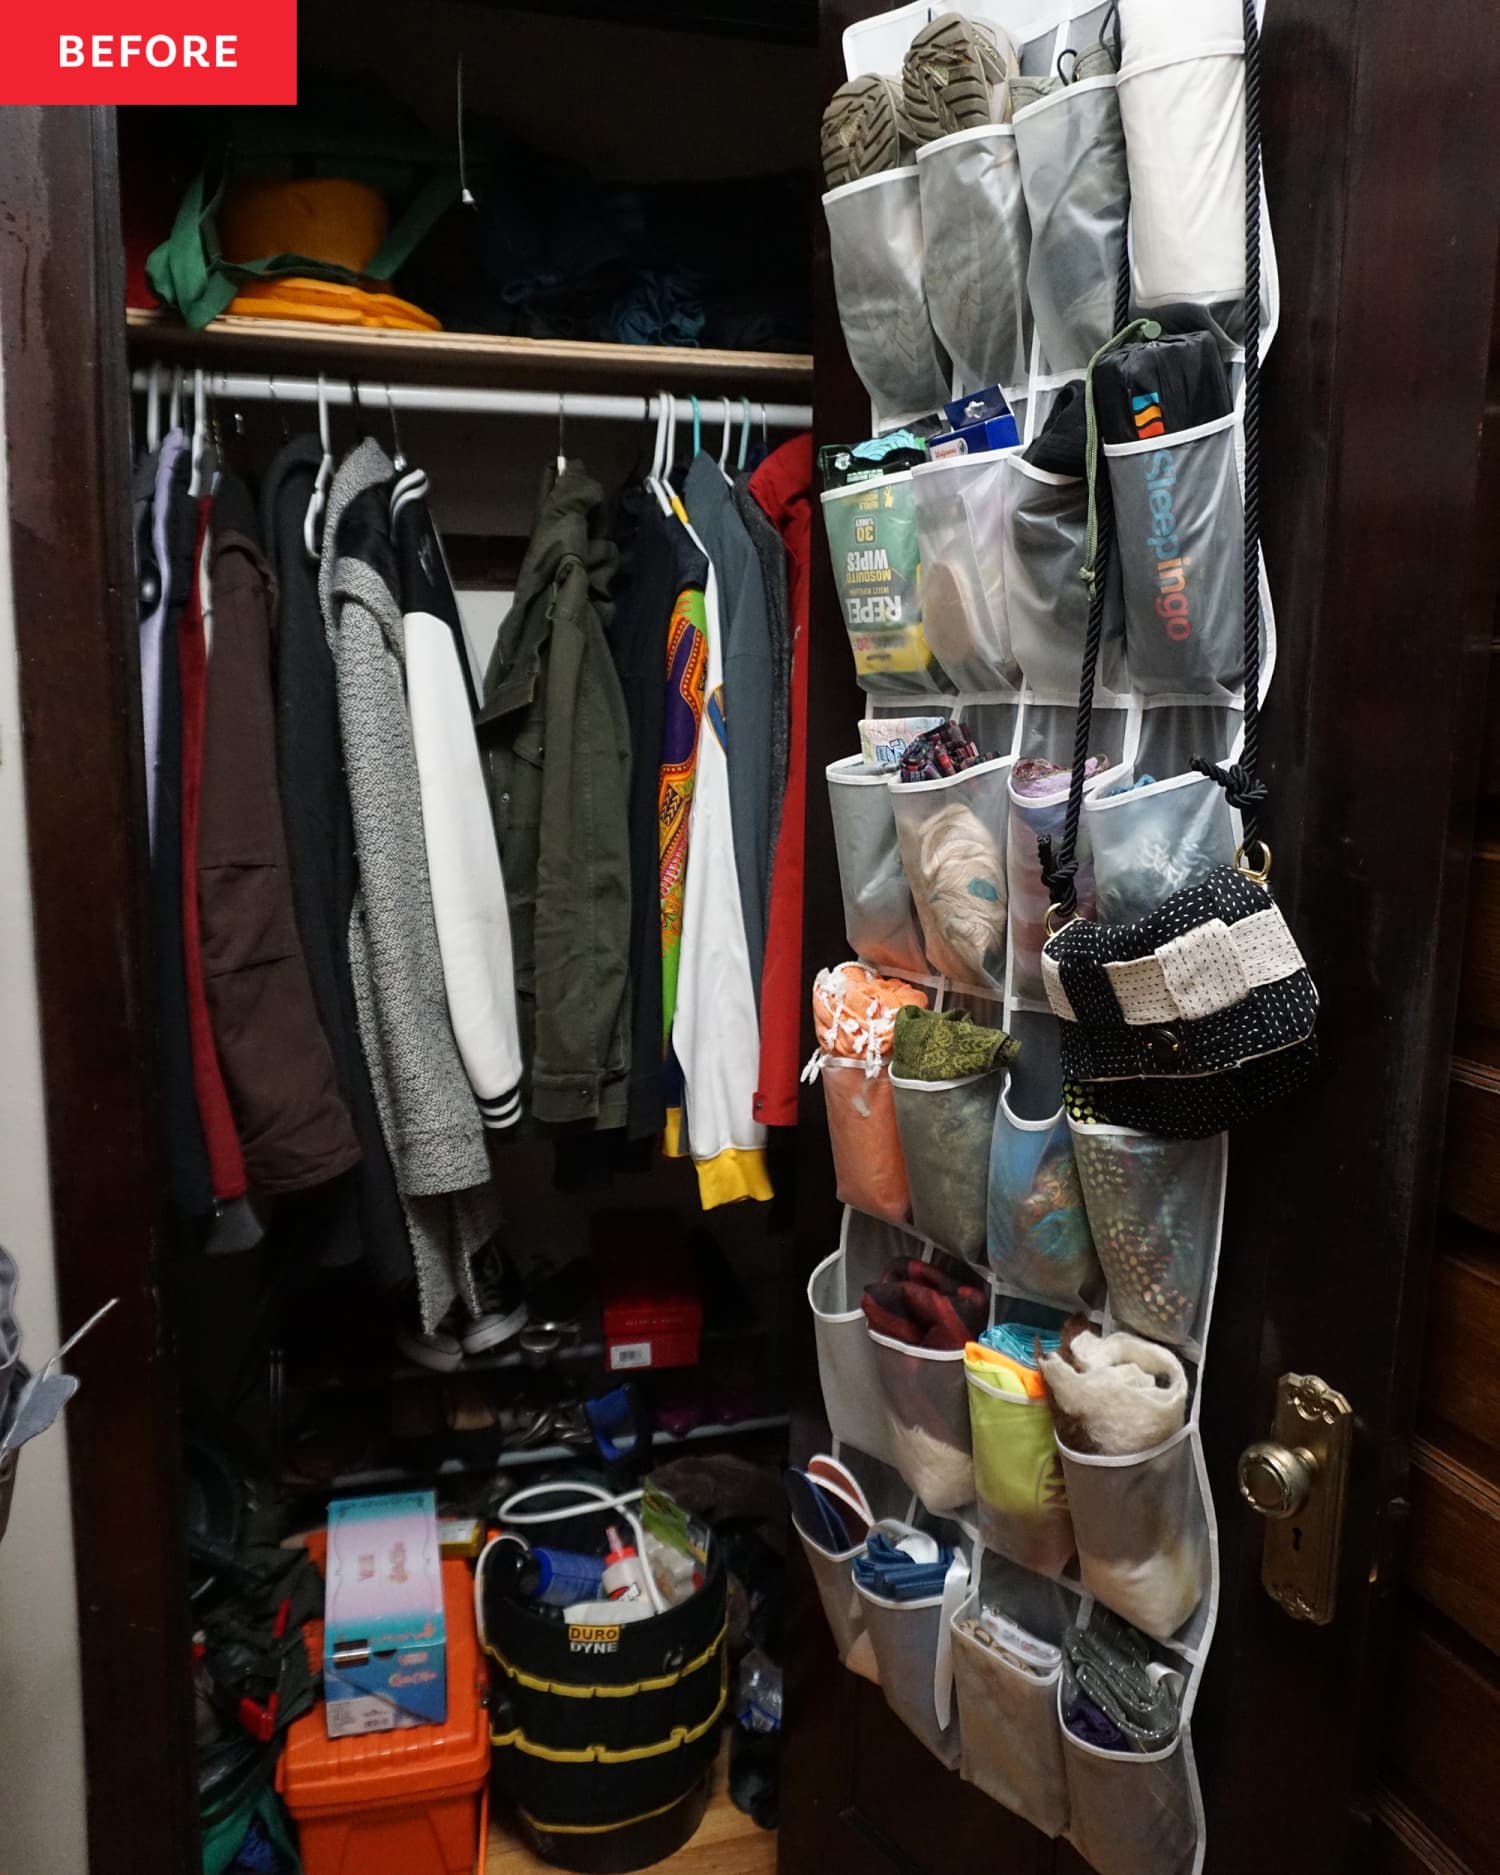 I Tried the \"Move-Out Method\" and It Cleared Out My Closet in 2 Hours